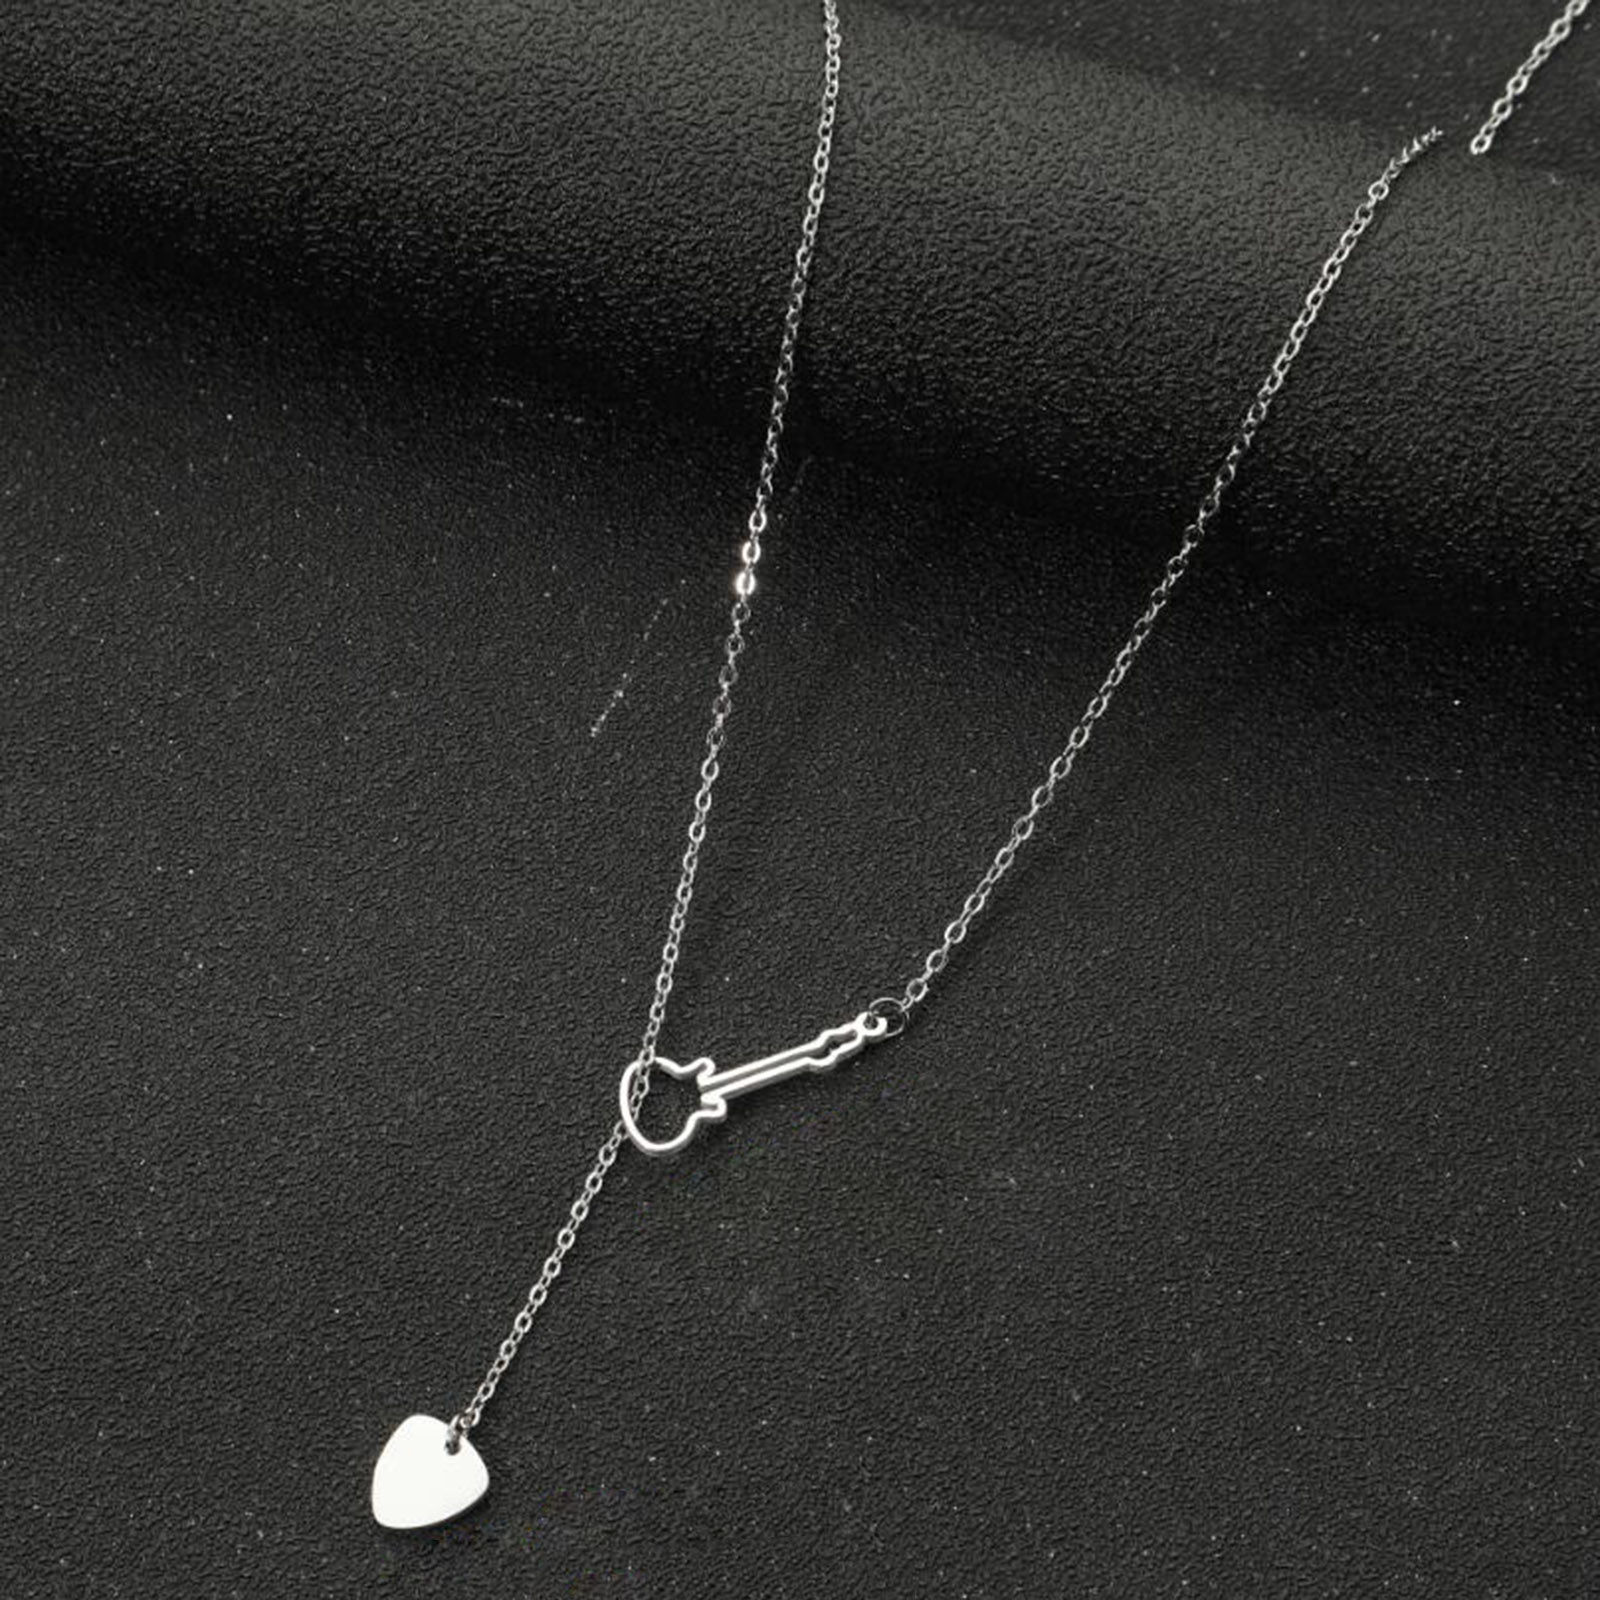 Picture of Titanium Steel Stylish Y Shaped Lariat Necklace Silver Tone Guitar Musical Instrument Heart Hollow 45cm(17 6/8") long, 1 Piece